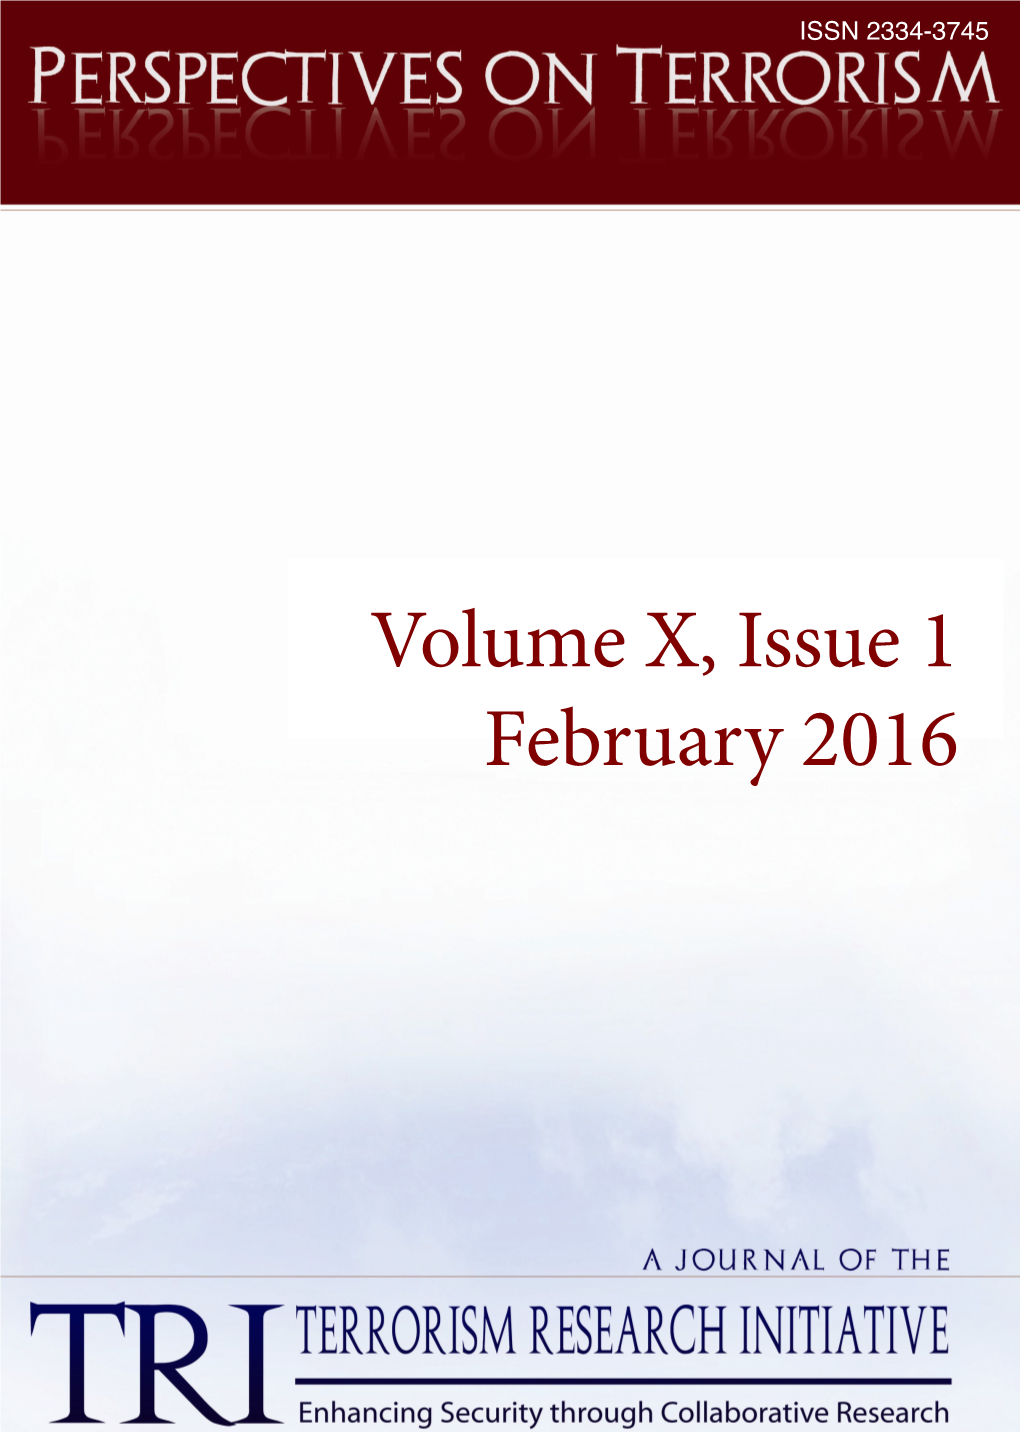 Volume X, Issue 1 February 2016 PERSPECTIVES on TERRORISM Volume 10, Issue 1